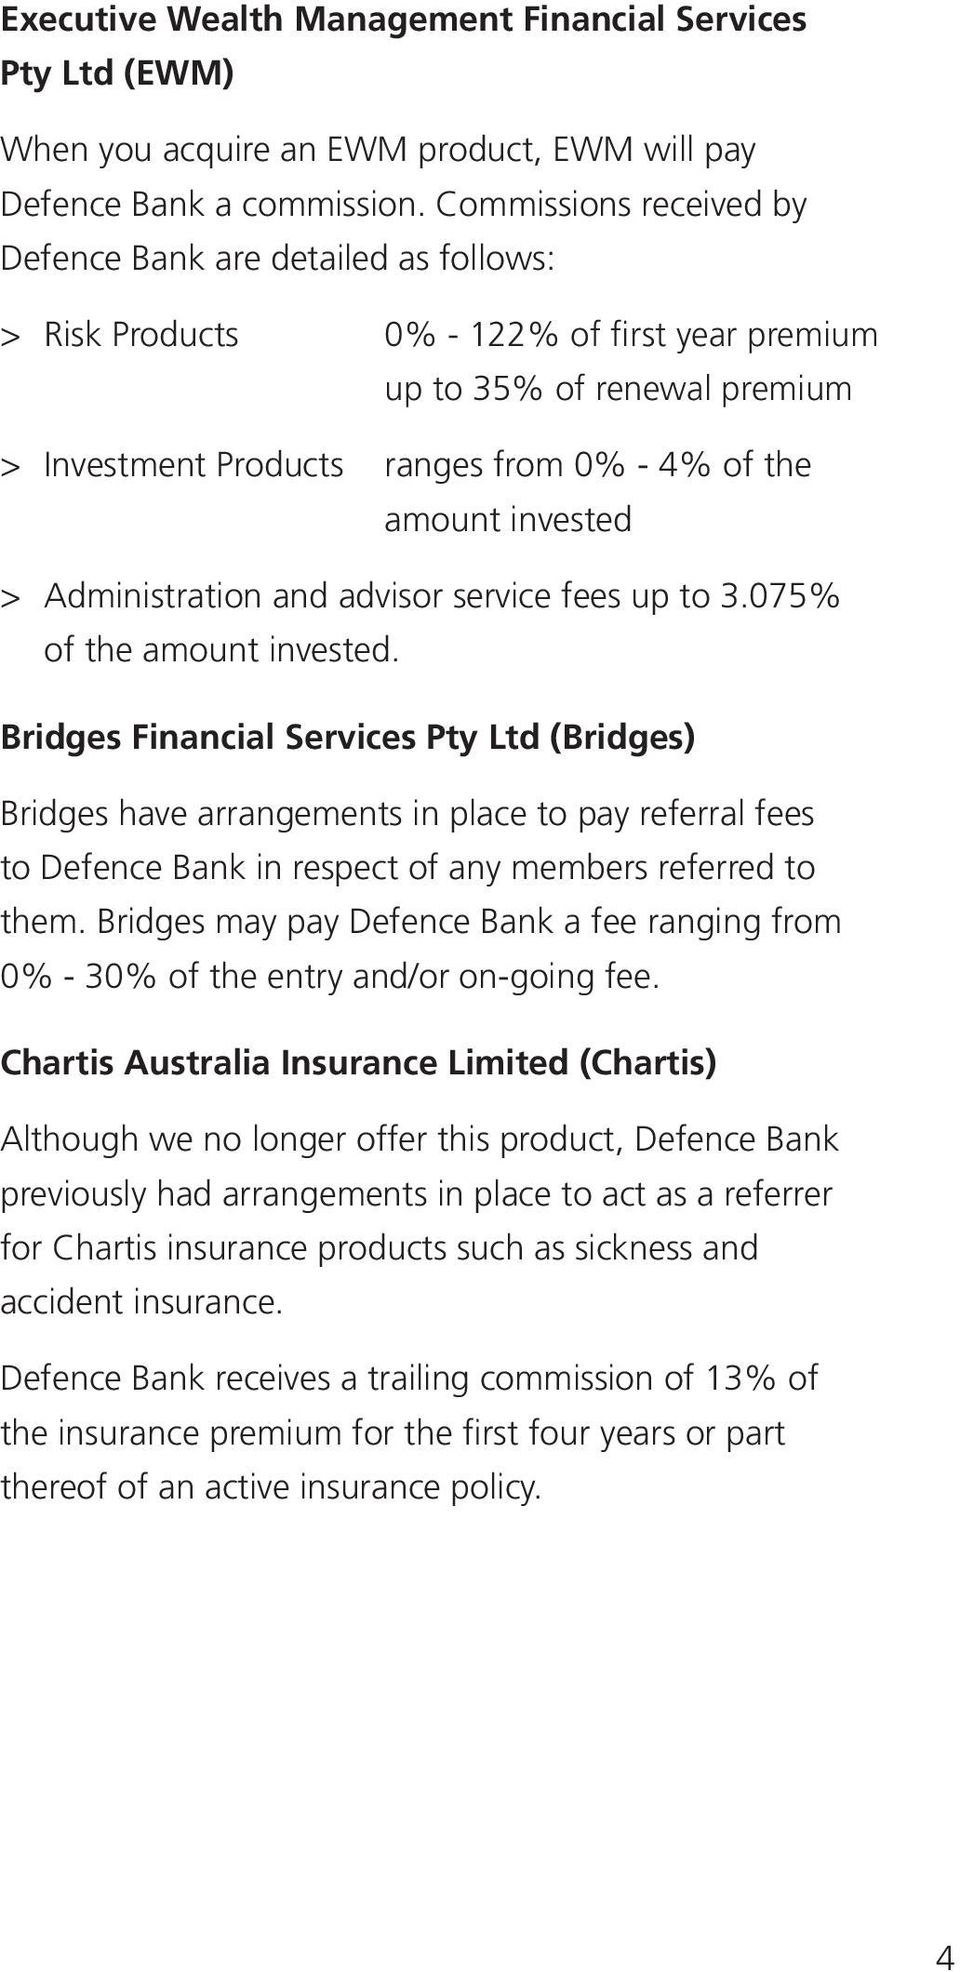 Administration and advisor service fees up to 3.075% of the amount invested.